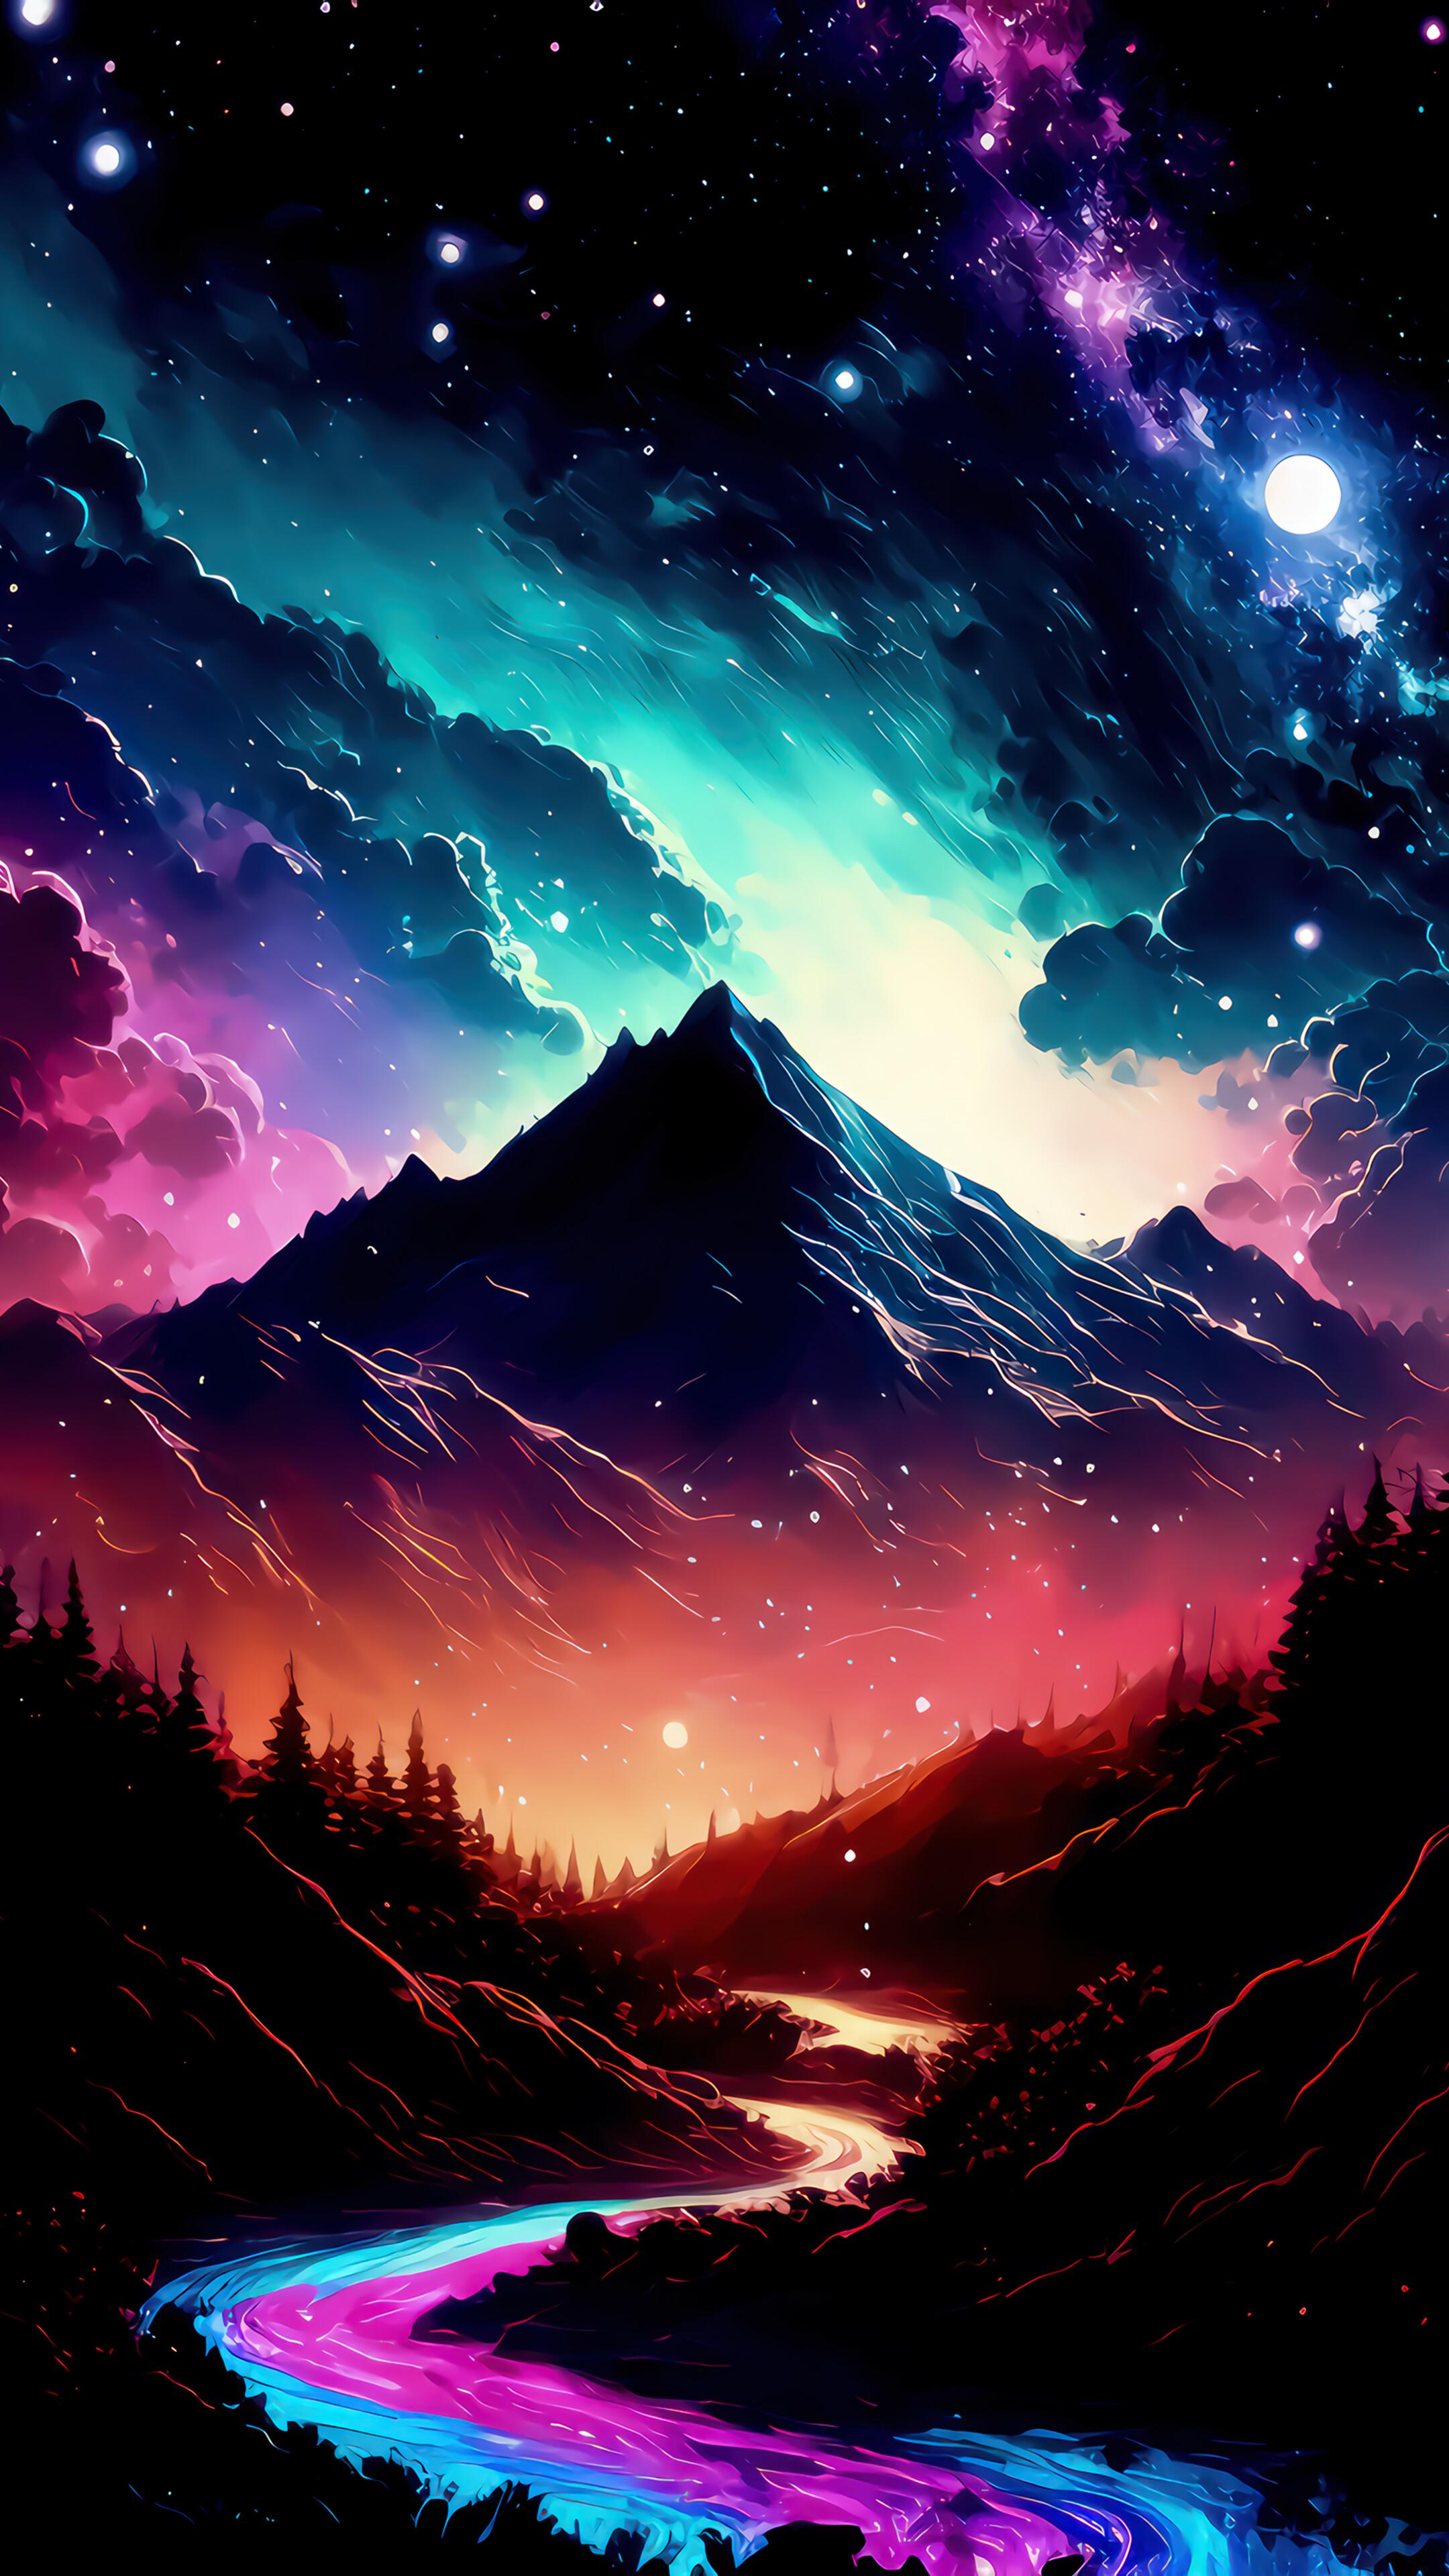 Night Sky Colorful Beautiful Clouds Mountain Valley Art 4k